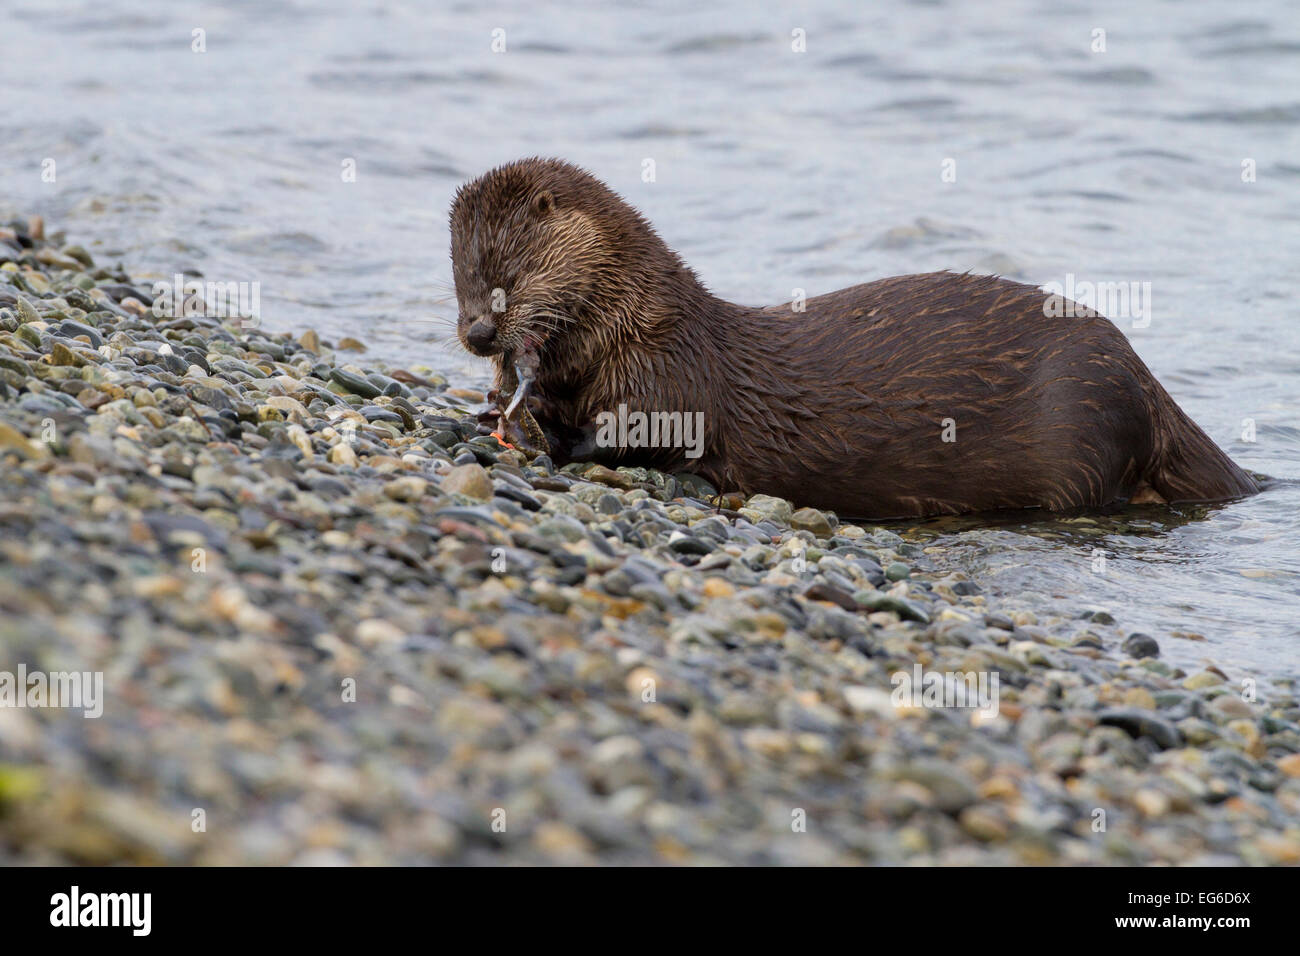 Northern River Otter (Lontra canadensis) devouring a fish along the shoreline at Whiffen Spit, Sooke, BC, Canada in January Stock Photo